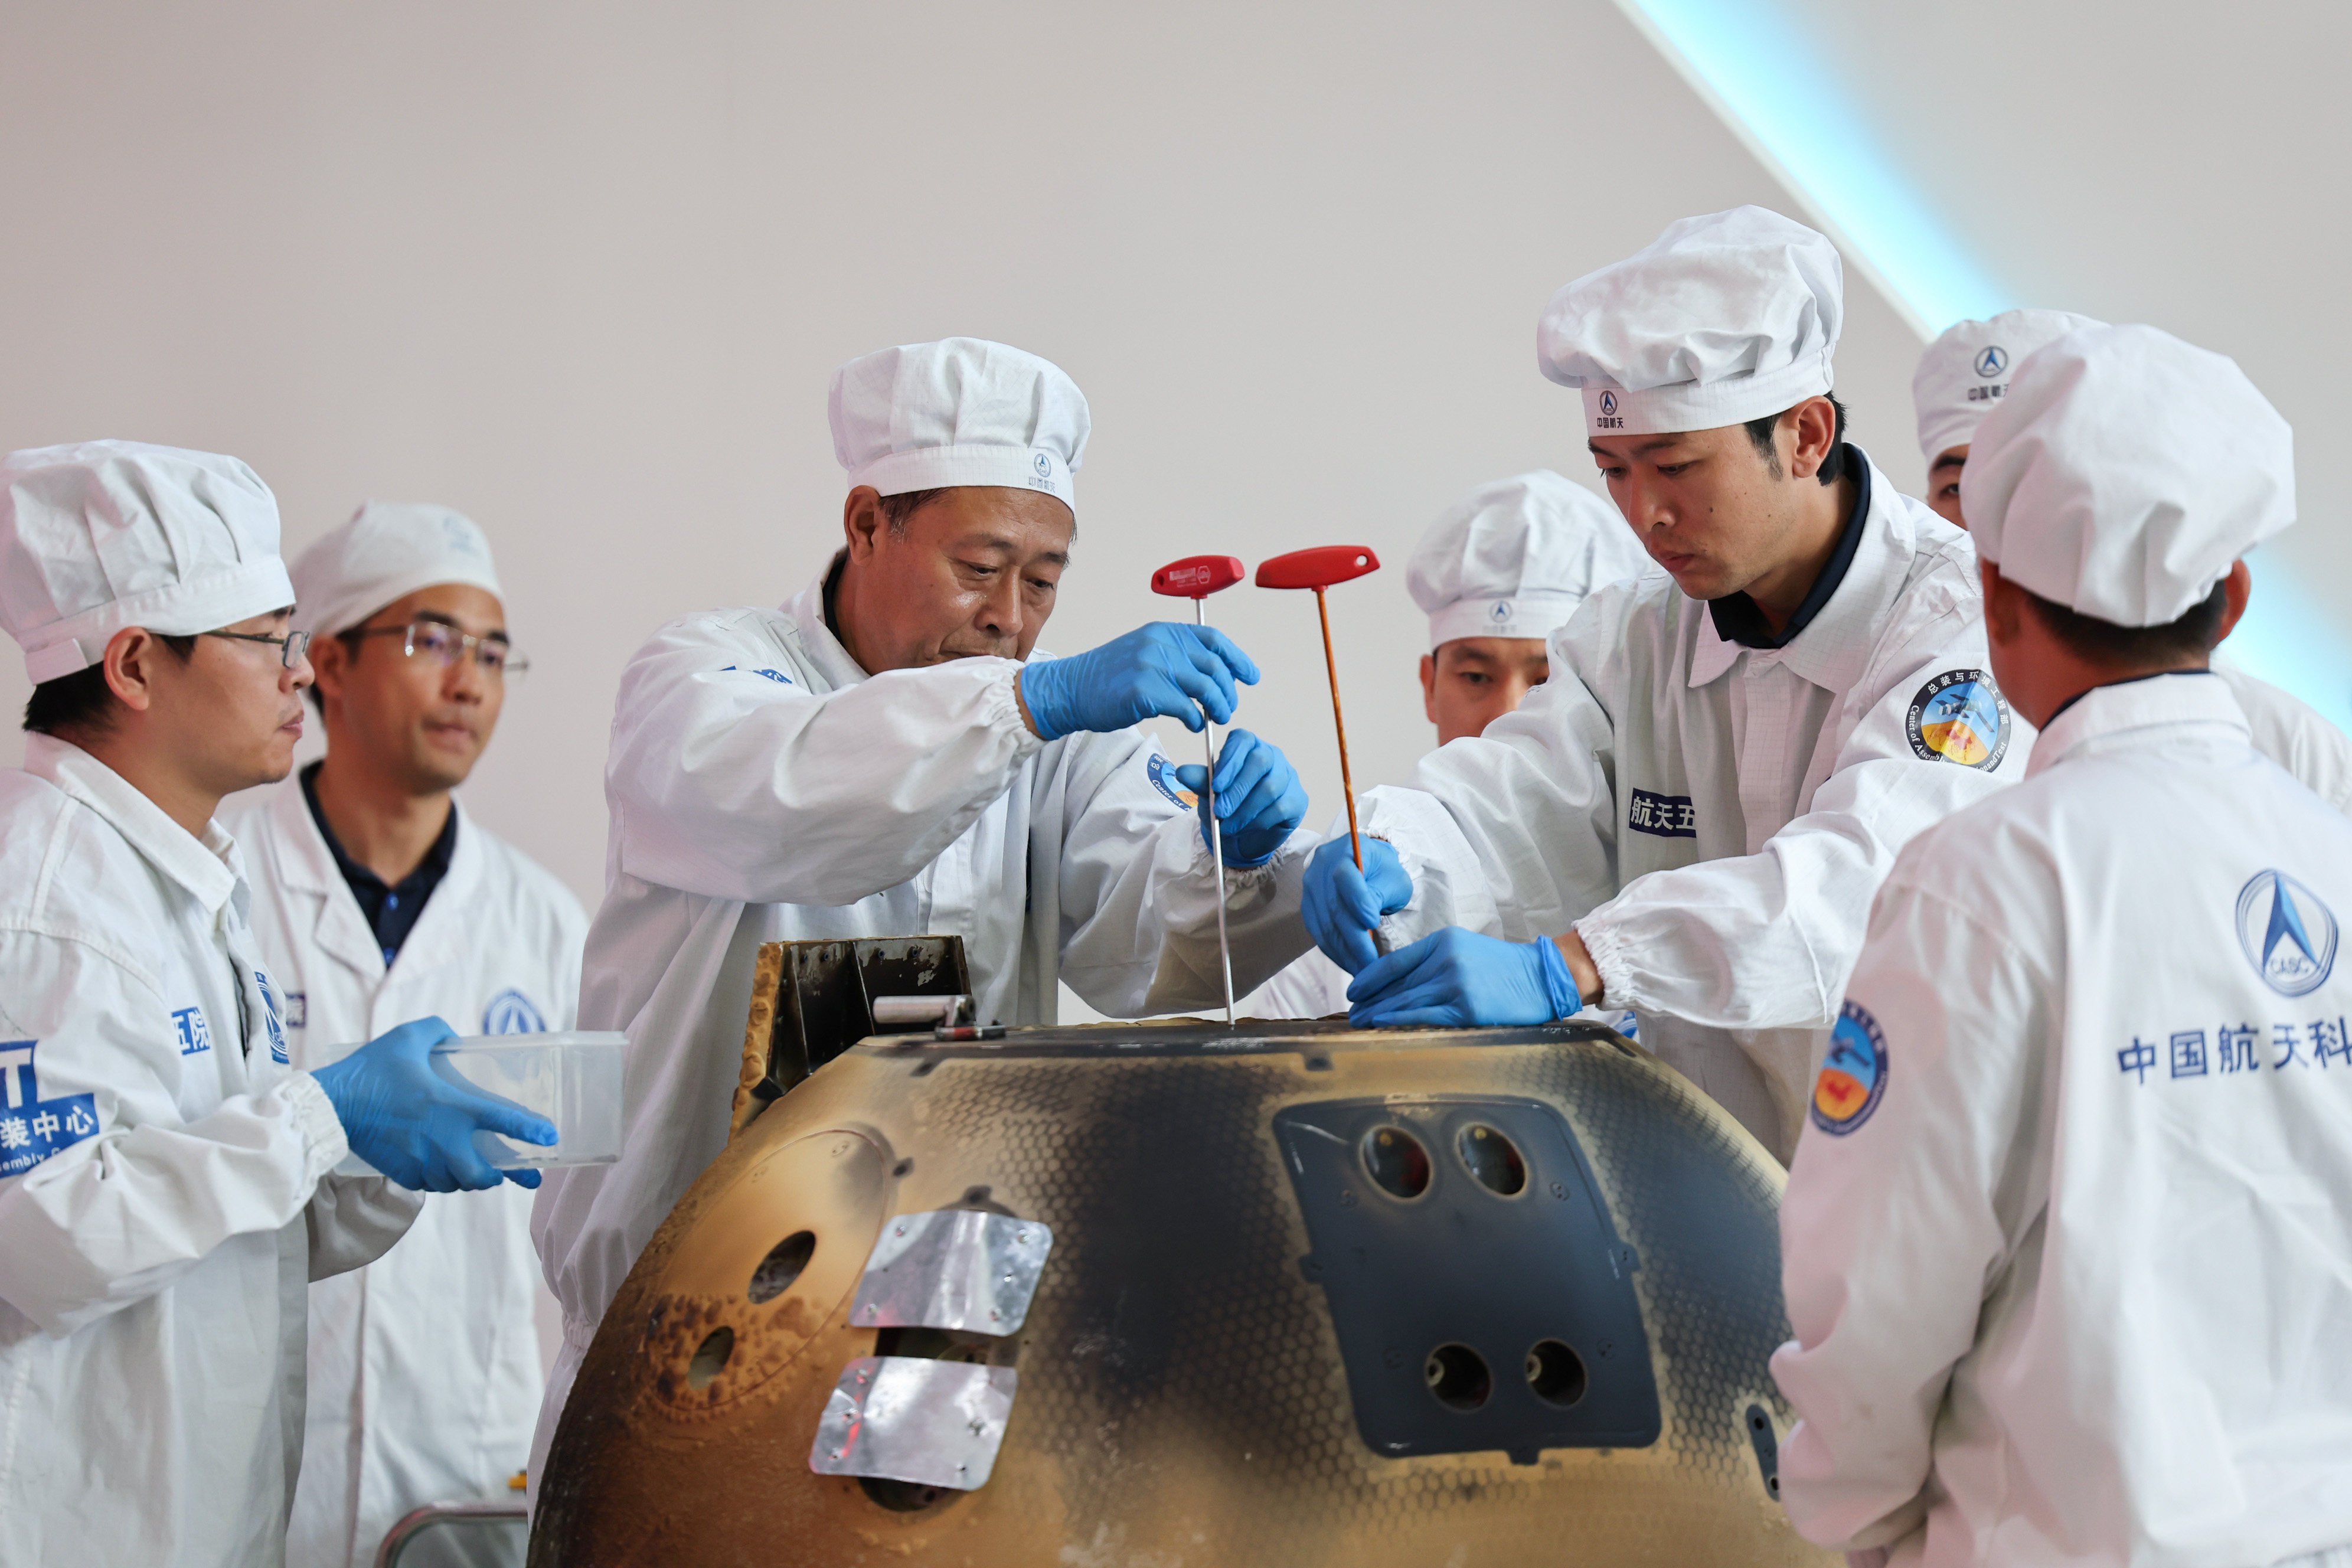 The spacecraft’s return capsule is opened during a ceremony at the China Academy of Space Technology in Beijing on Wednesday. Photo: Xinhua